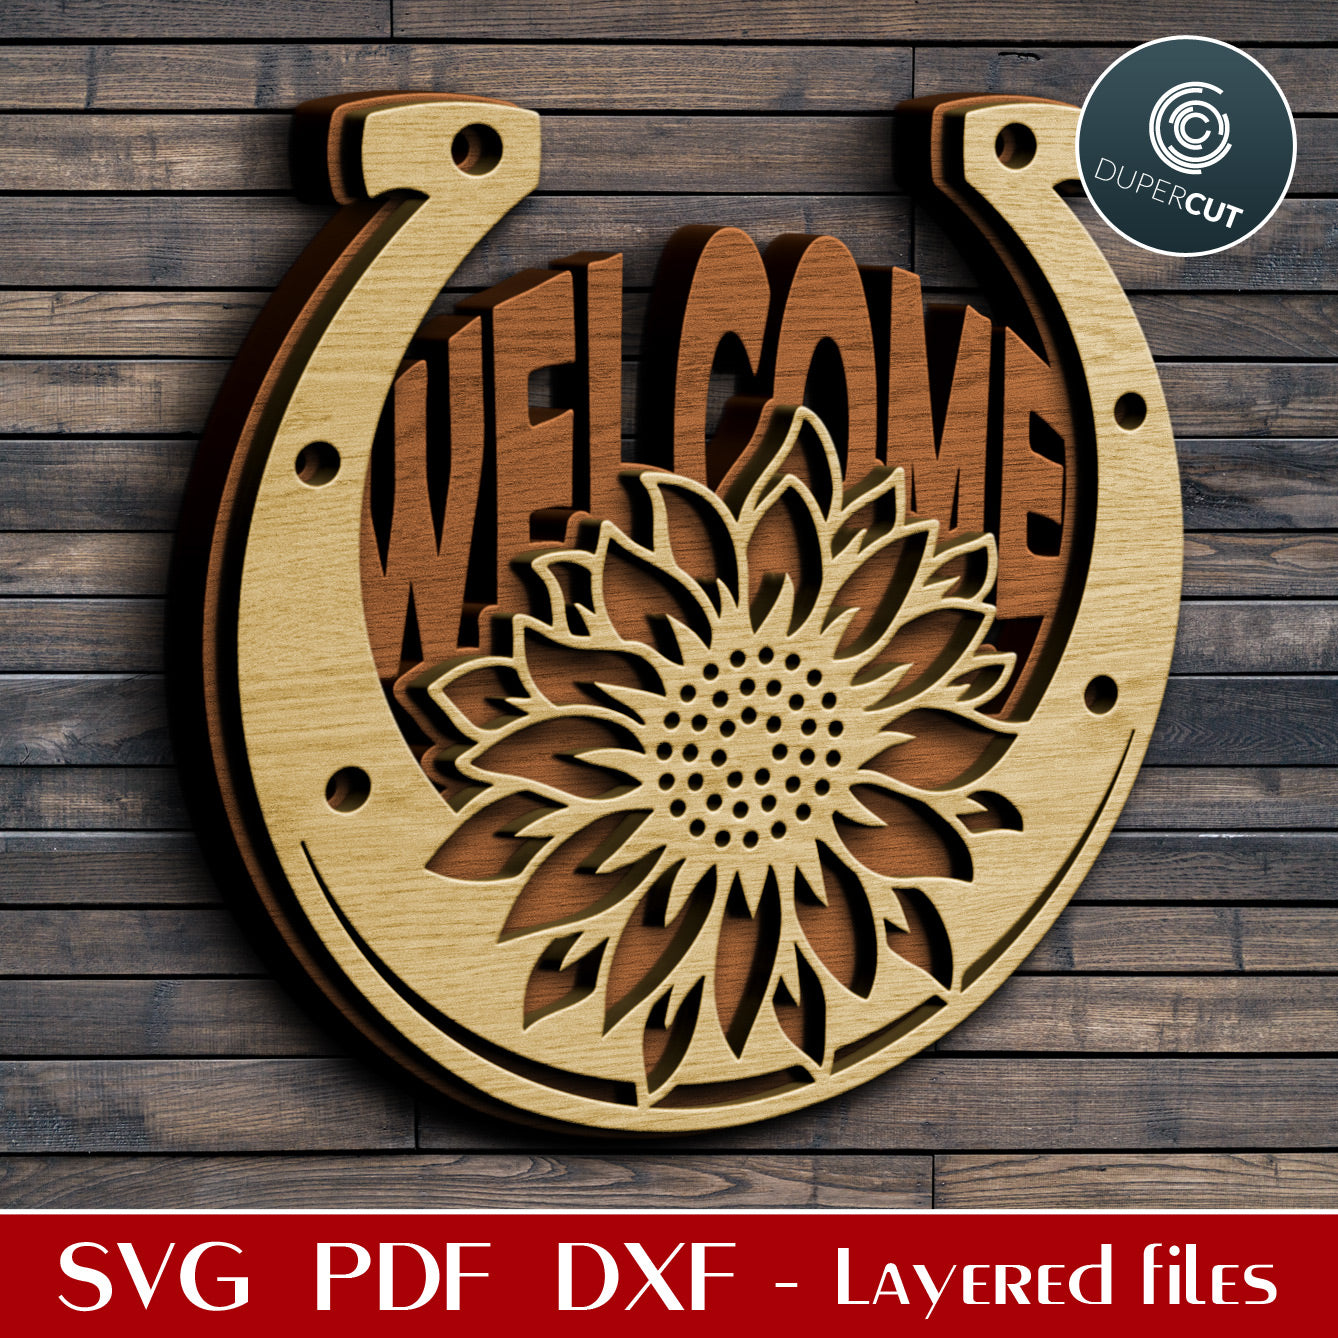 Horseshoe welcome sign DIY cottage decoration - SVG PDF DXF layered laser cutting files for Glowforge, Cricut, Silhouette Cameo, CNC plasma machines by DuperCut